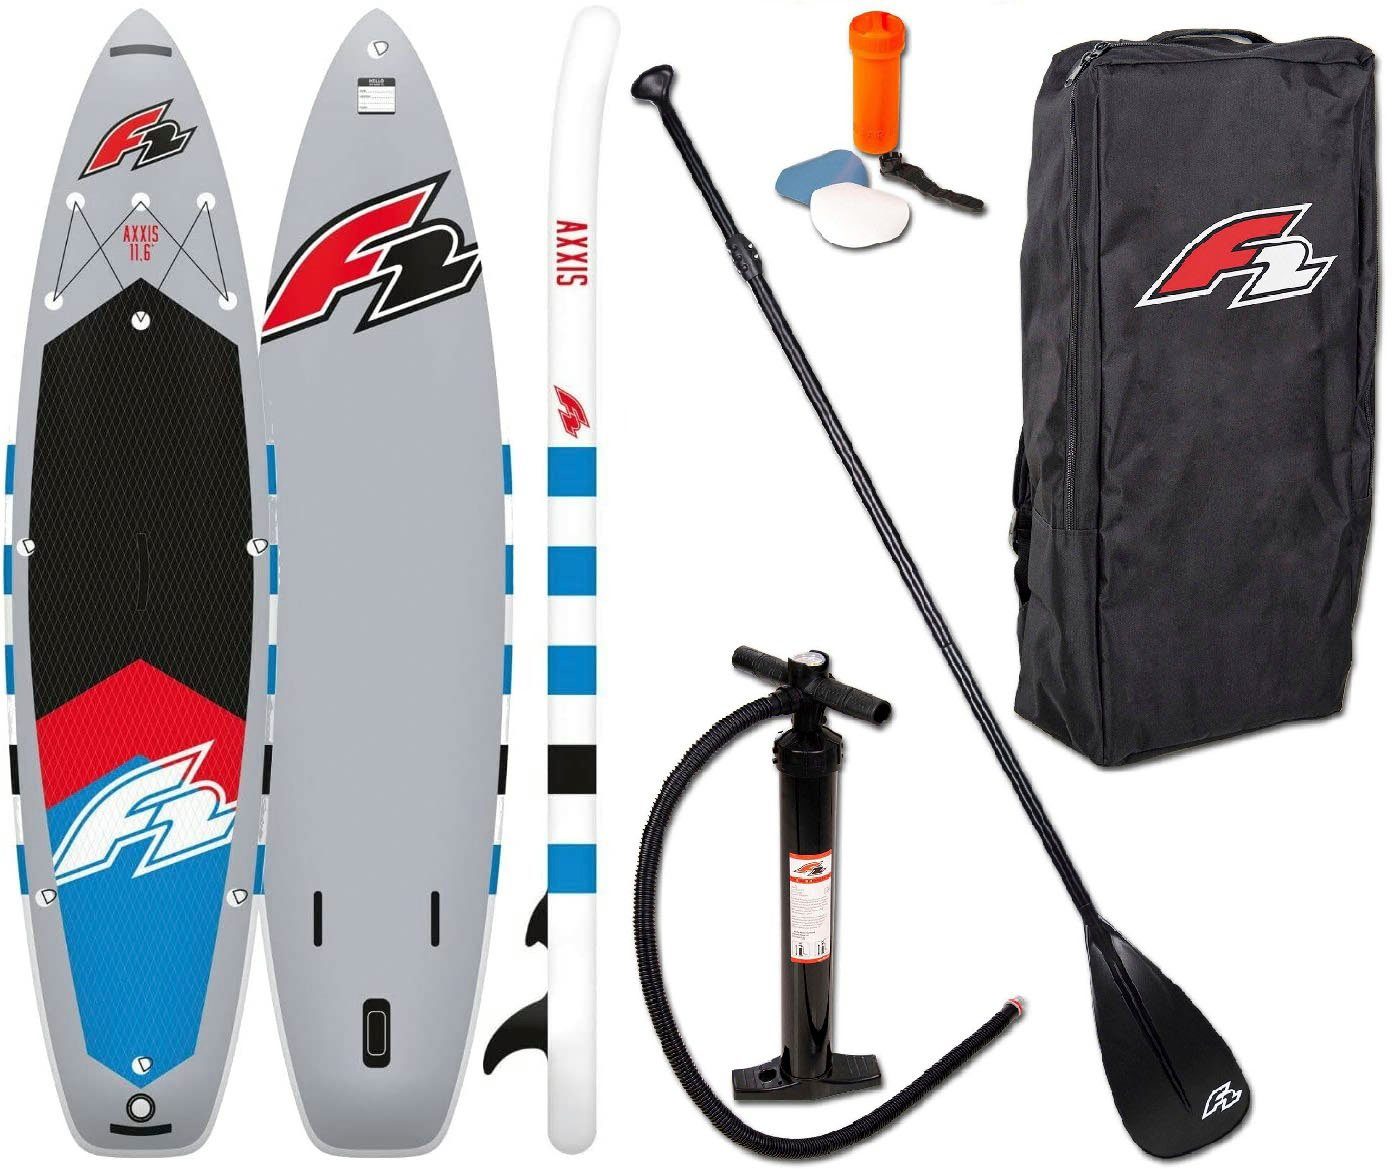 F2 Inflatable SUP-Board grey, 11,6 tlg) Axxis (Packung, 5